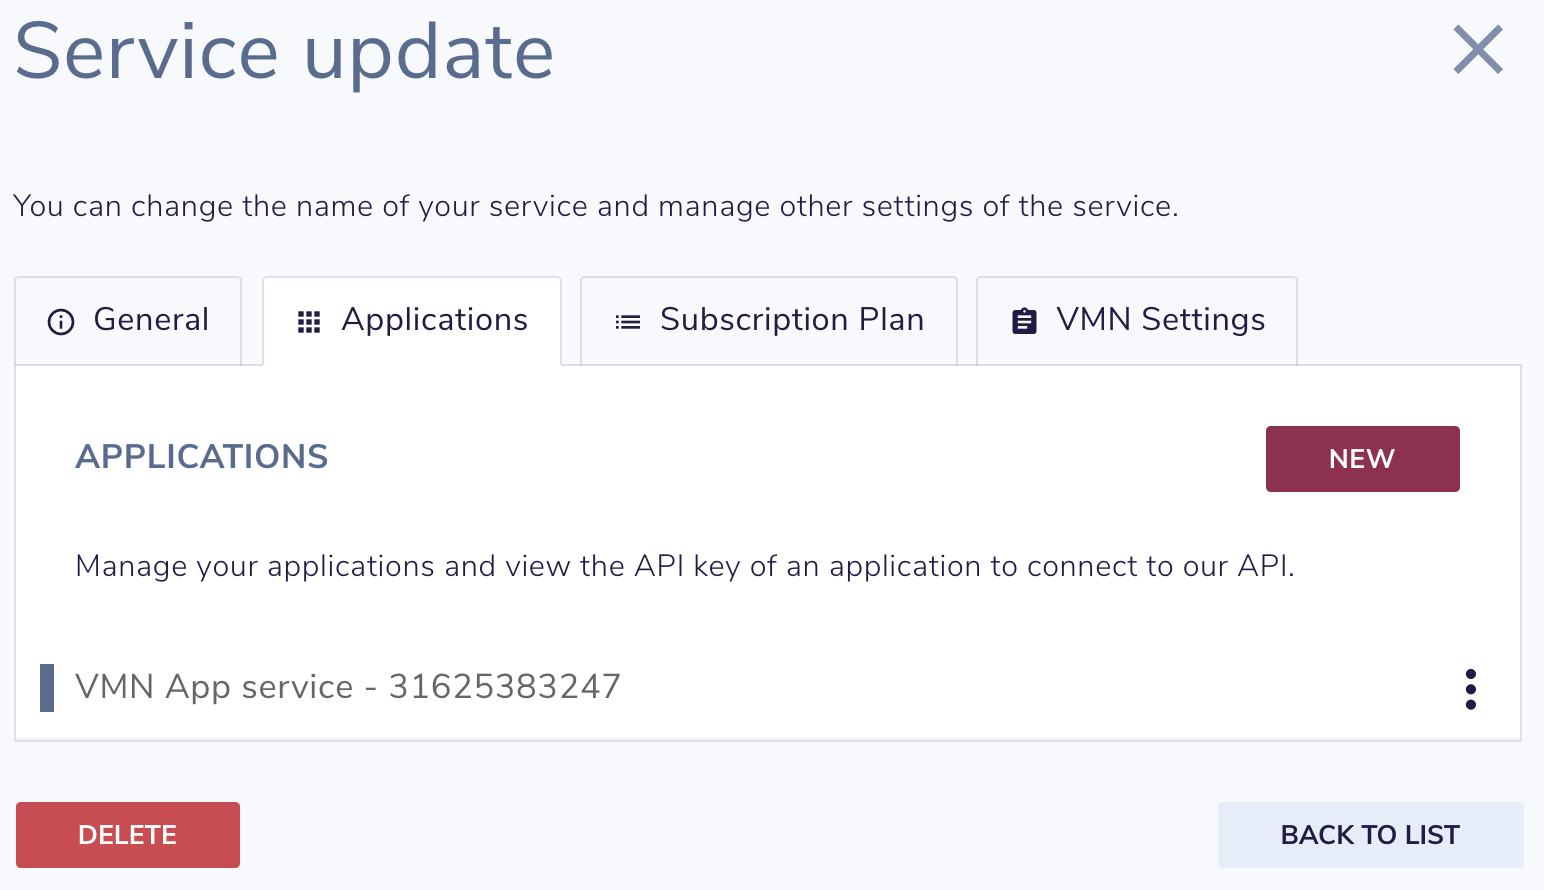 How to configure the VMN app - step 3